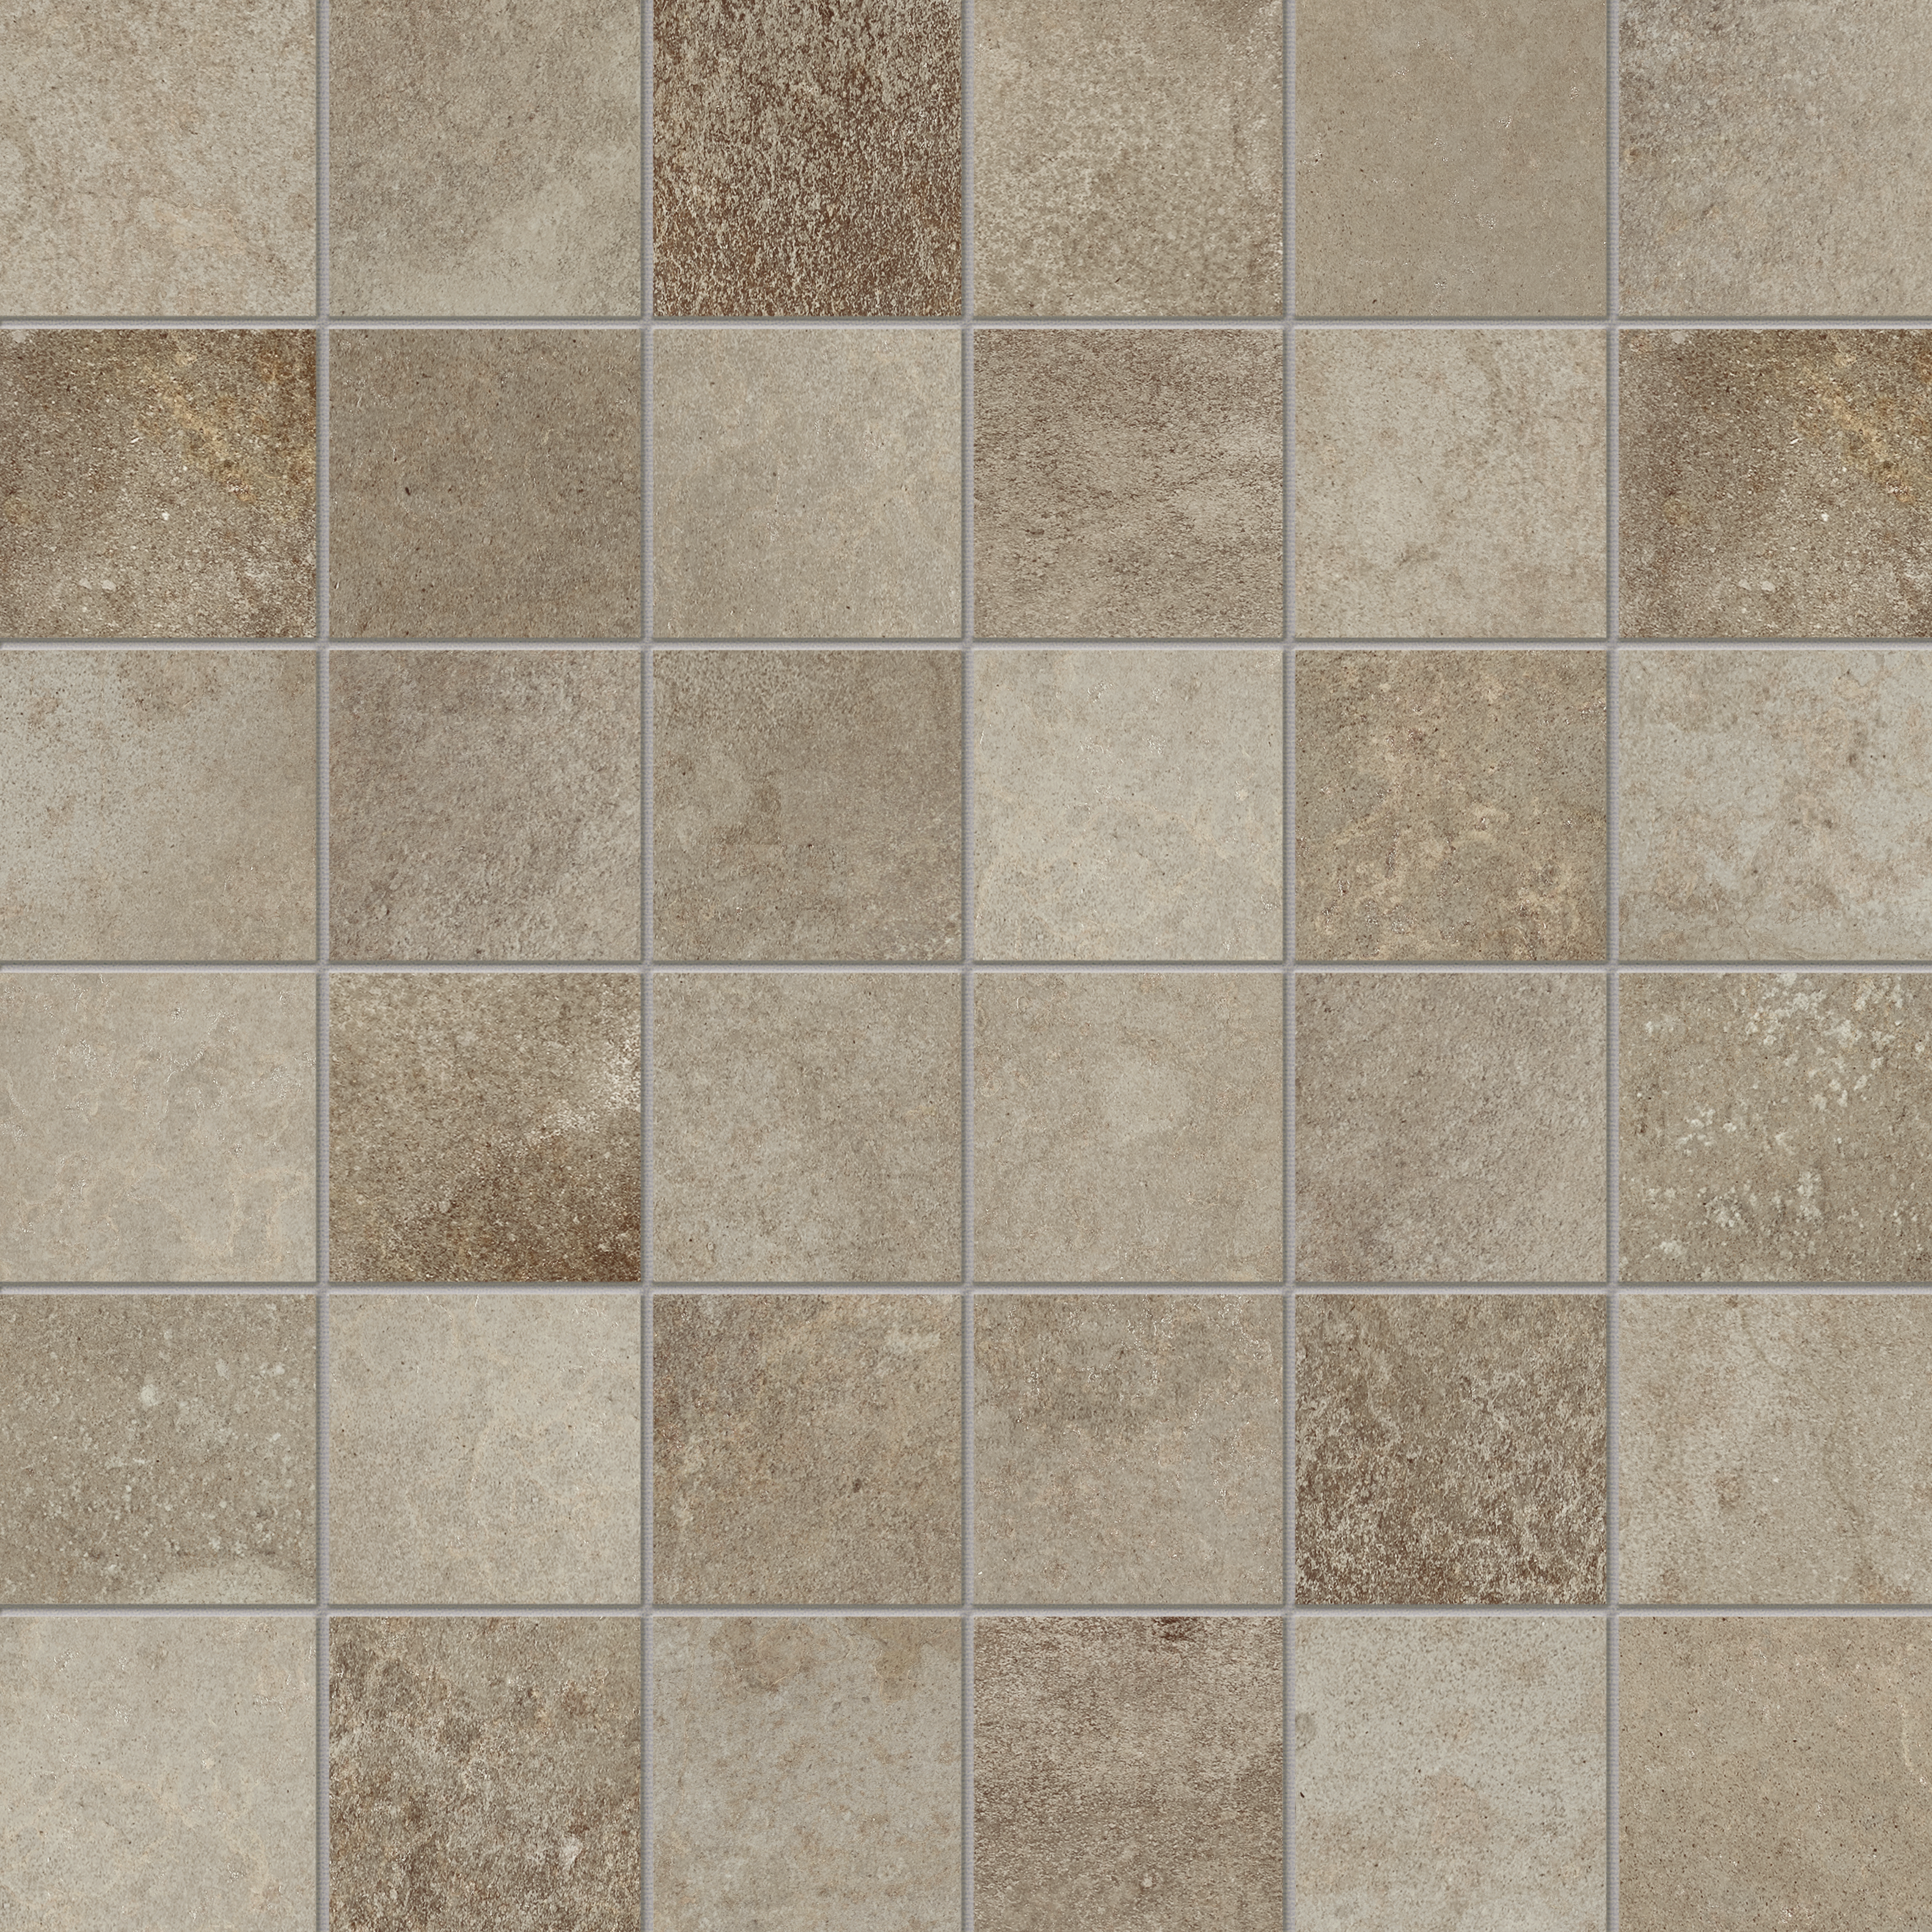 iron straight stack 2x2-inch pattern color body porcelain mosaic from ceraforge anatolia collection distributed by surface group international matte finish straight edge edge mesh shape